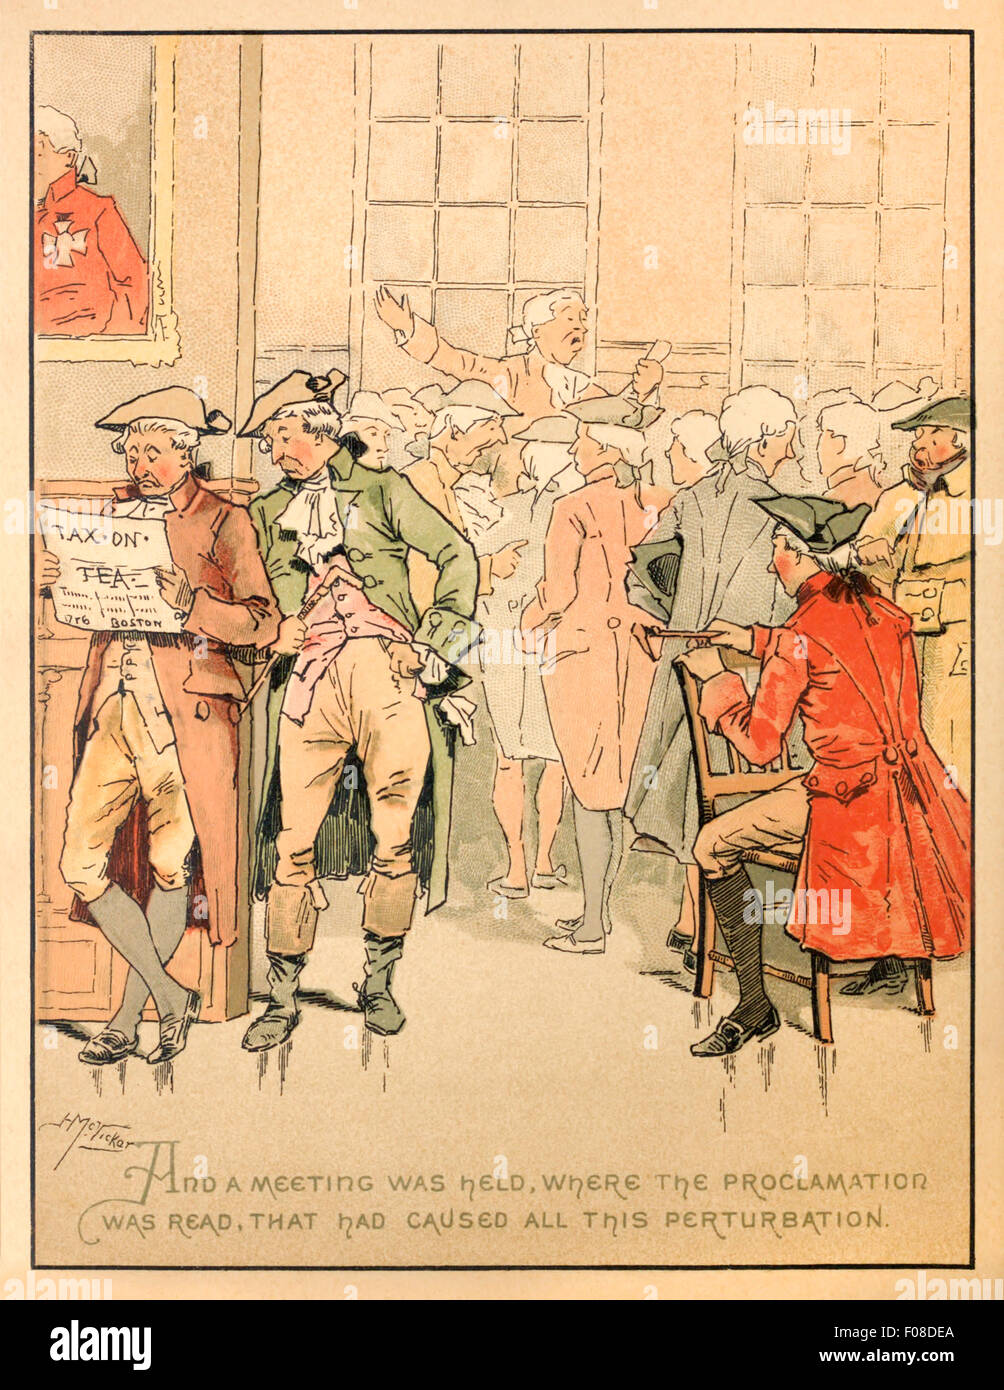 At a meeting in Faneuil Hall the Royal proclamation introducing the Tea Act of 1773 is read out. Illustration by Josephine Pollard (1834-1892). See description for more information. Stock Photo